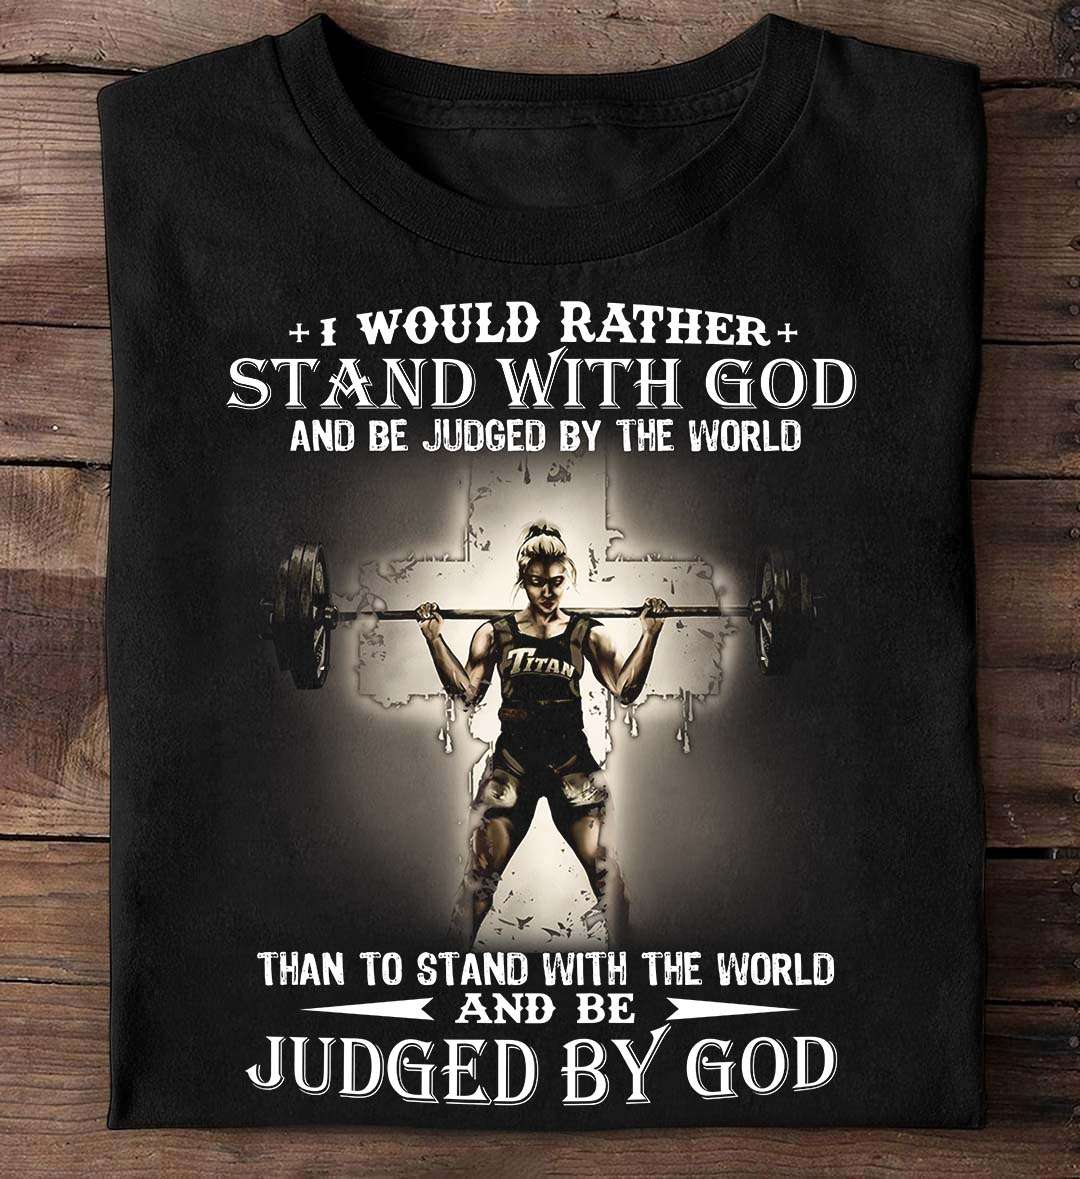 I would rather stand with god and be judged by the world - Lifting woman, strong woman lifting